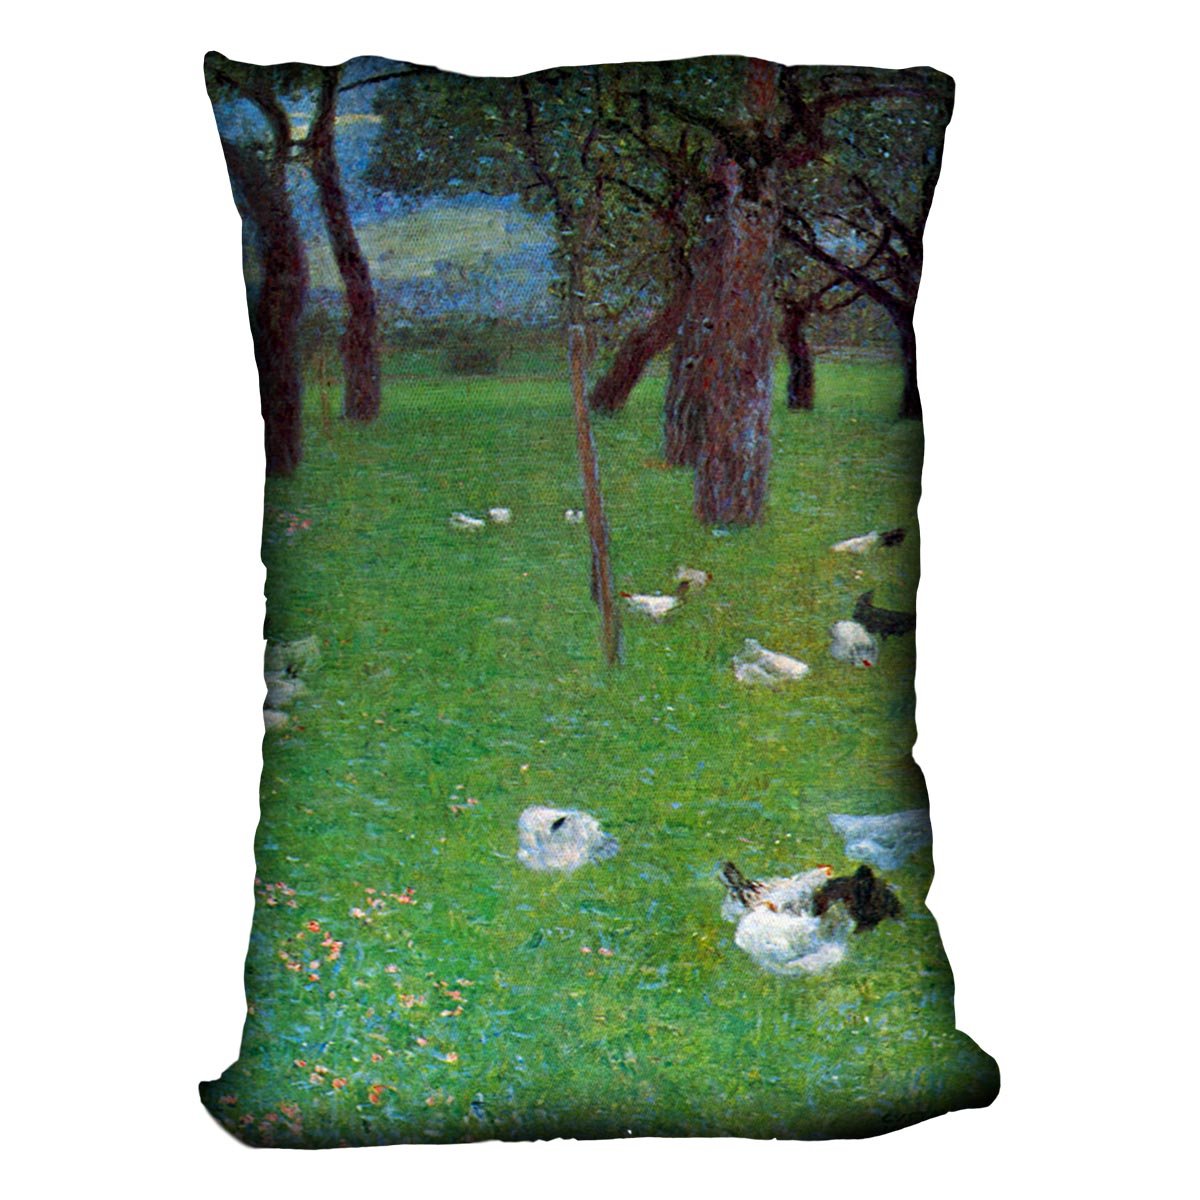 After the rain garden with chickens in St. Agatha by Klimt Throw Pillow